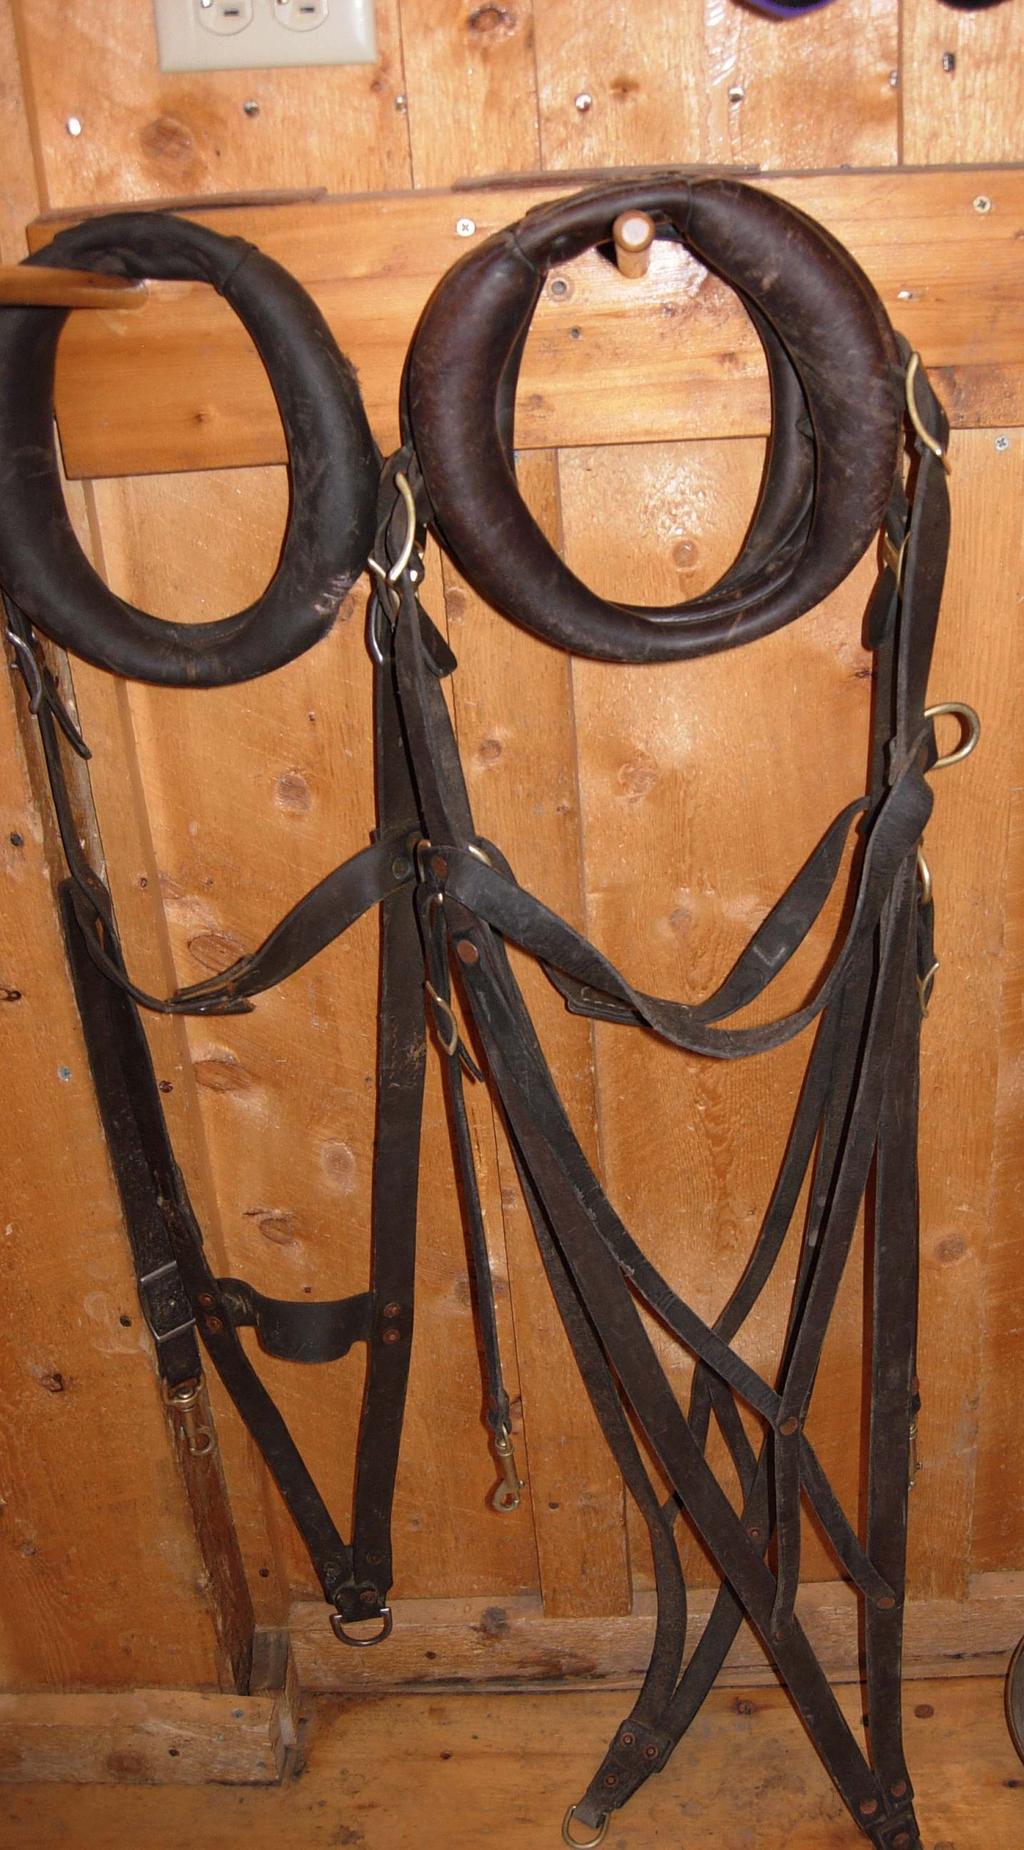 Harnesses Travois and Pack basket harnesses in leather Fittings and buckles should be brass finish if possible Early European Dog harnesses look much like what was used for horses.